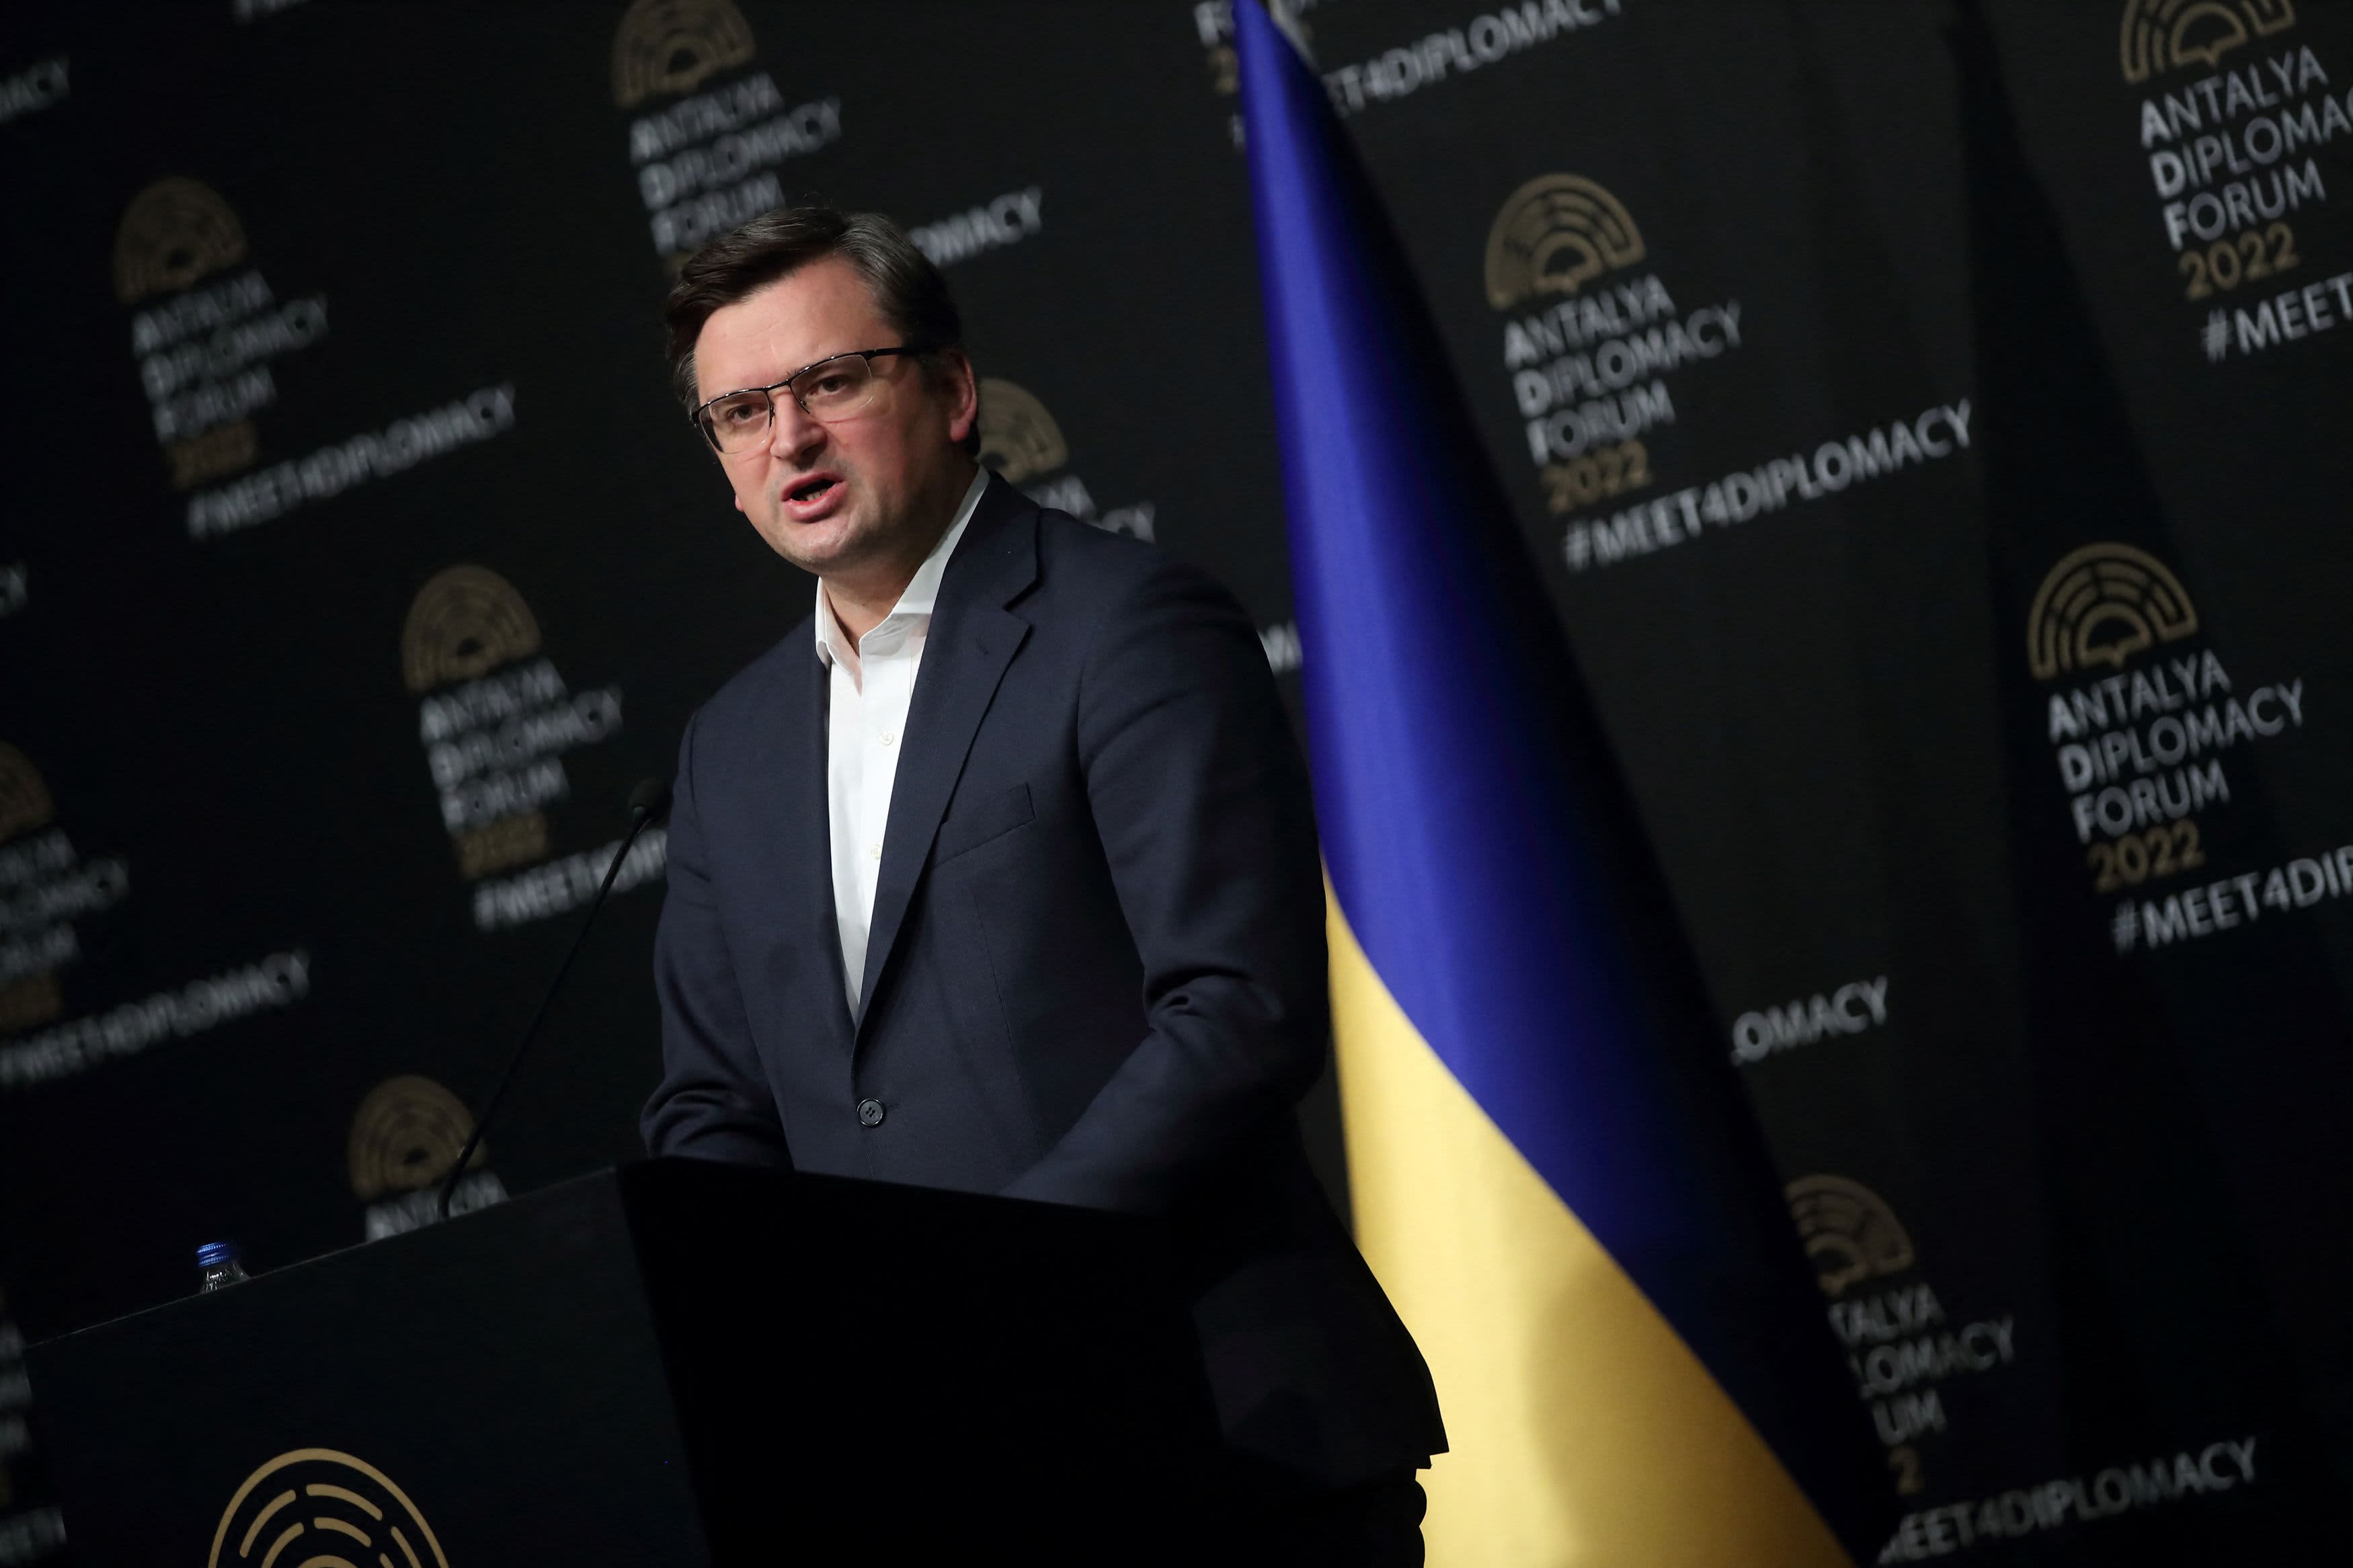 Ukraine foreign minister says Russian officials ‘live in their own reality’ after talks fail